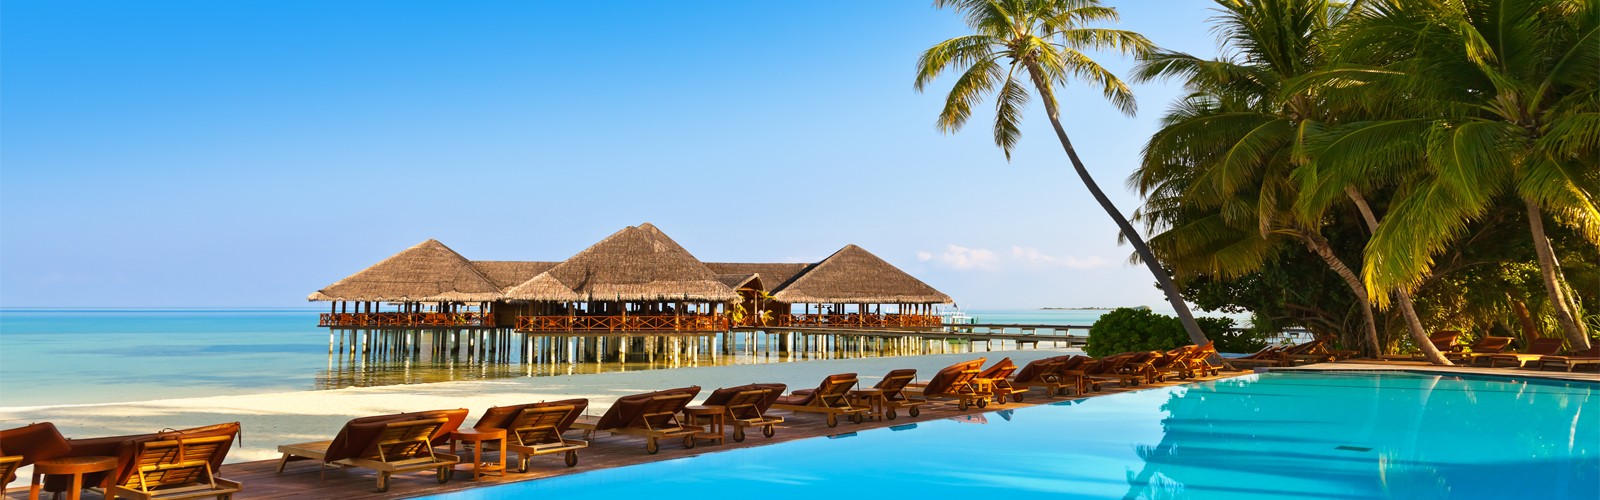 top things to do in maldives - blog - header